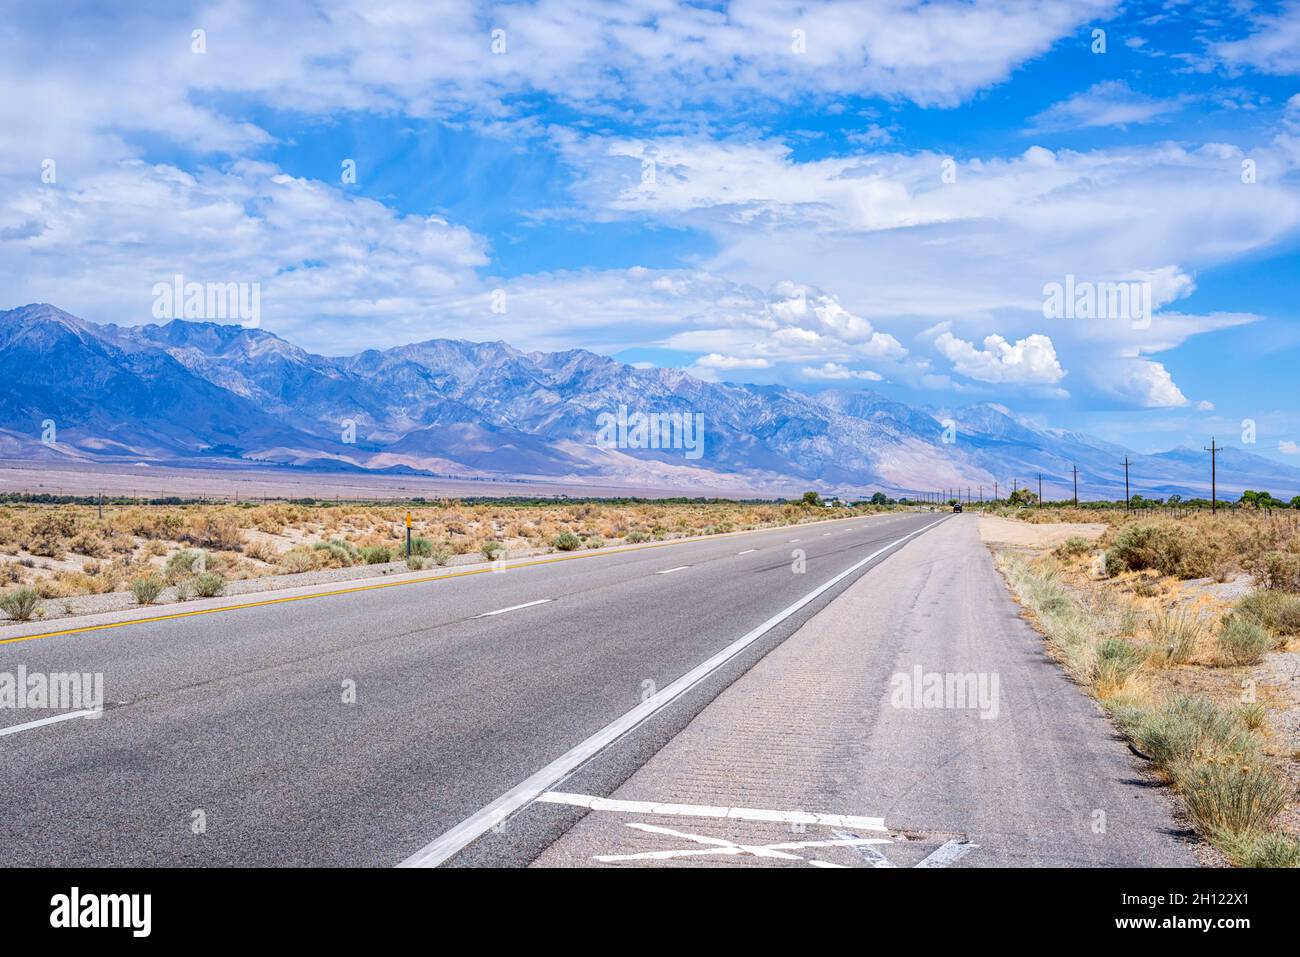 Scenic landscape of the Eastern Sierra mountains along US Route 395. About 30 minutes outside of Bishop, CA, USA. Stock Photo